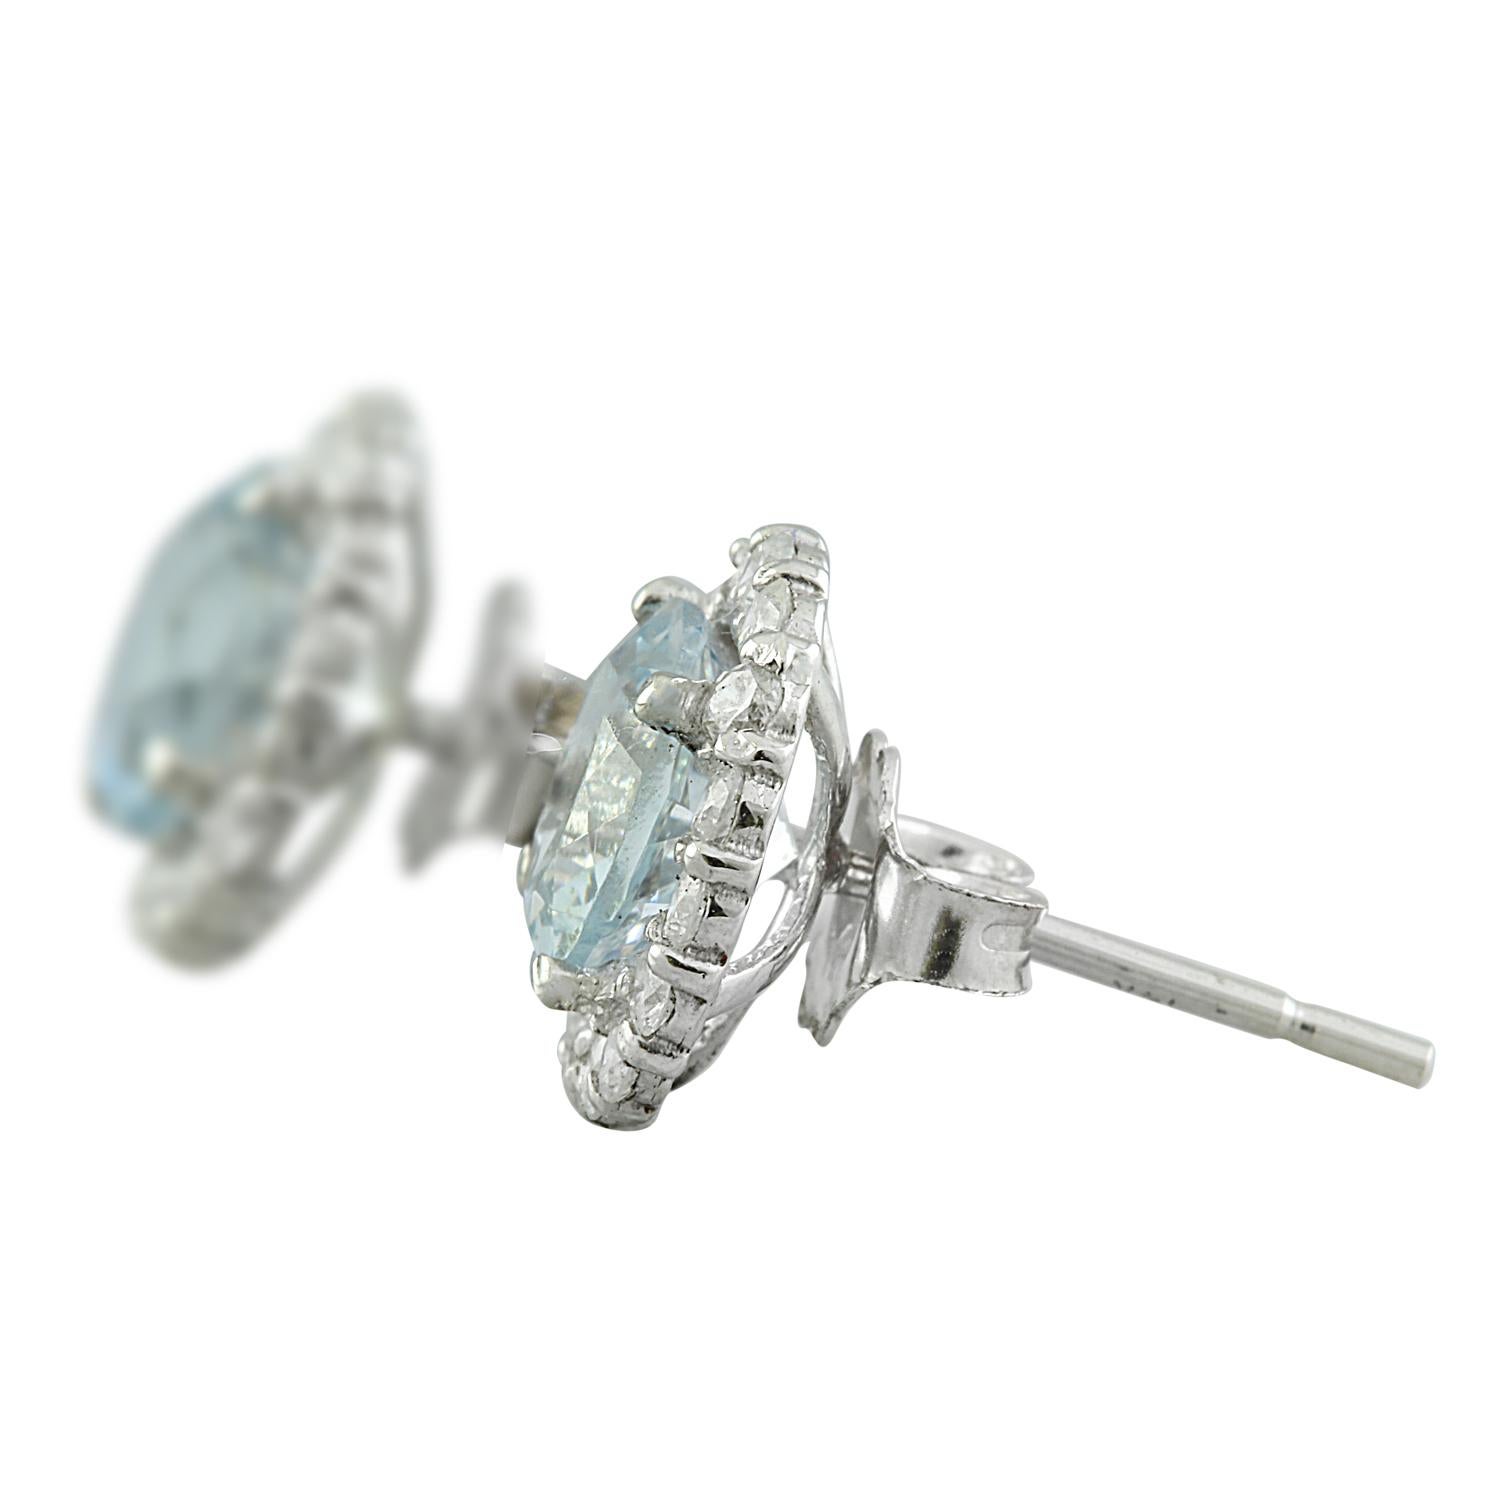 Exquisite Natural Aquamarine Diamond Earrings In 14 Karat White Gold In New Condition For Sale In Los Angeles, CA